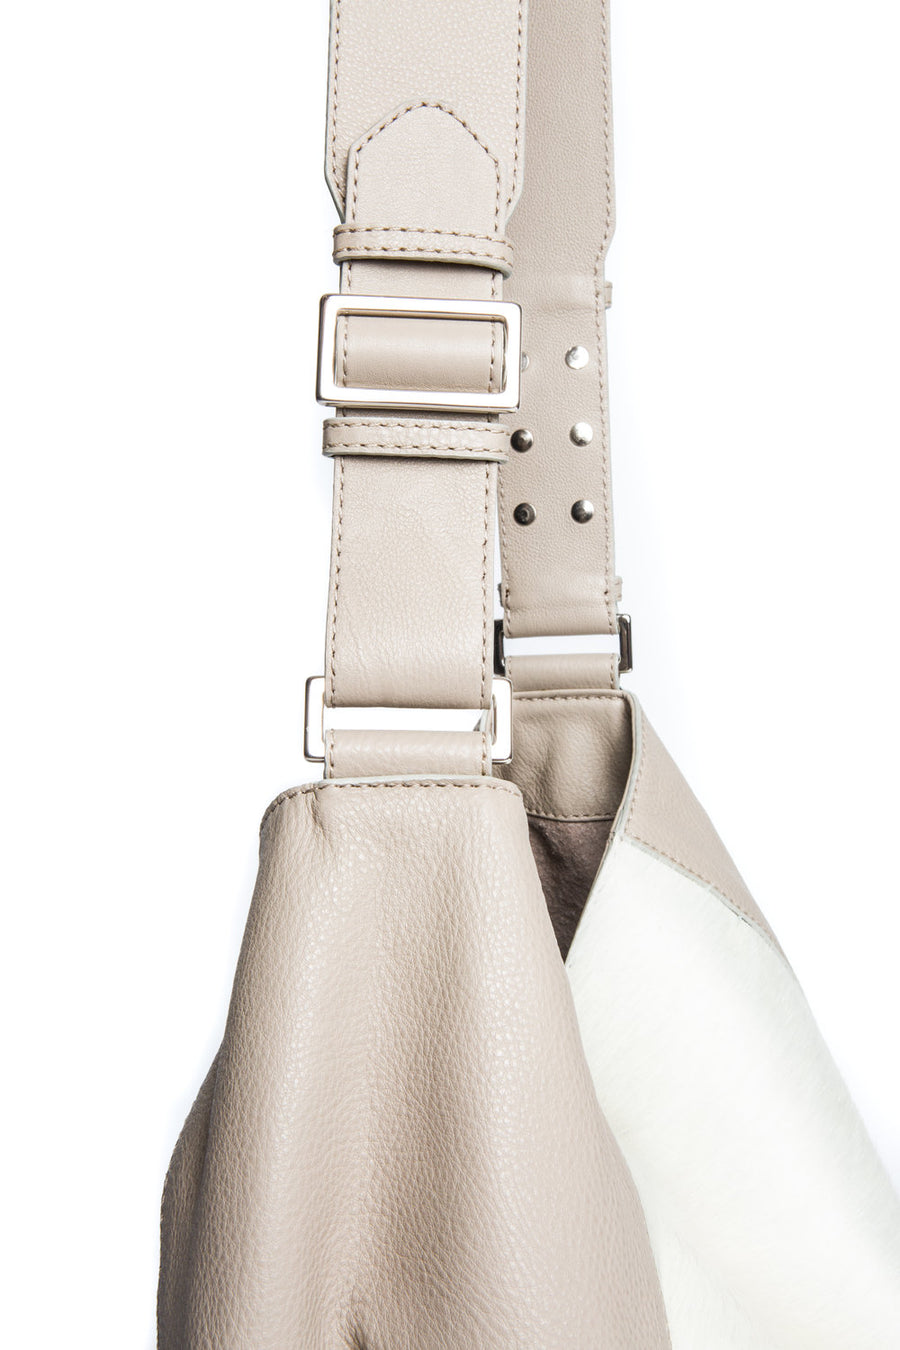 Manhattan Crossbody Messenger in Taupe w Ivory - Canvas & Hyde NYC